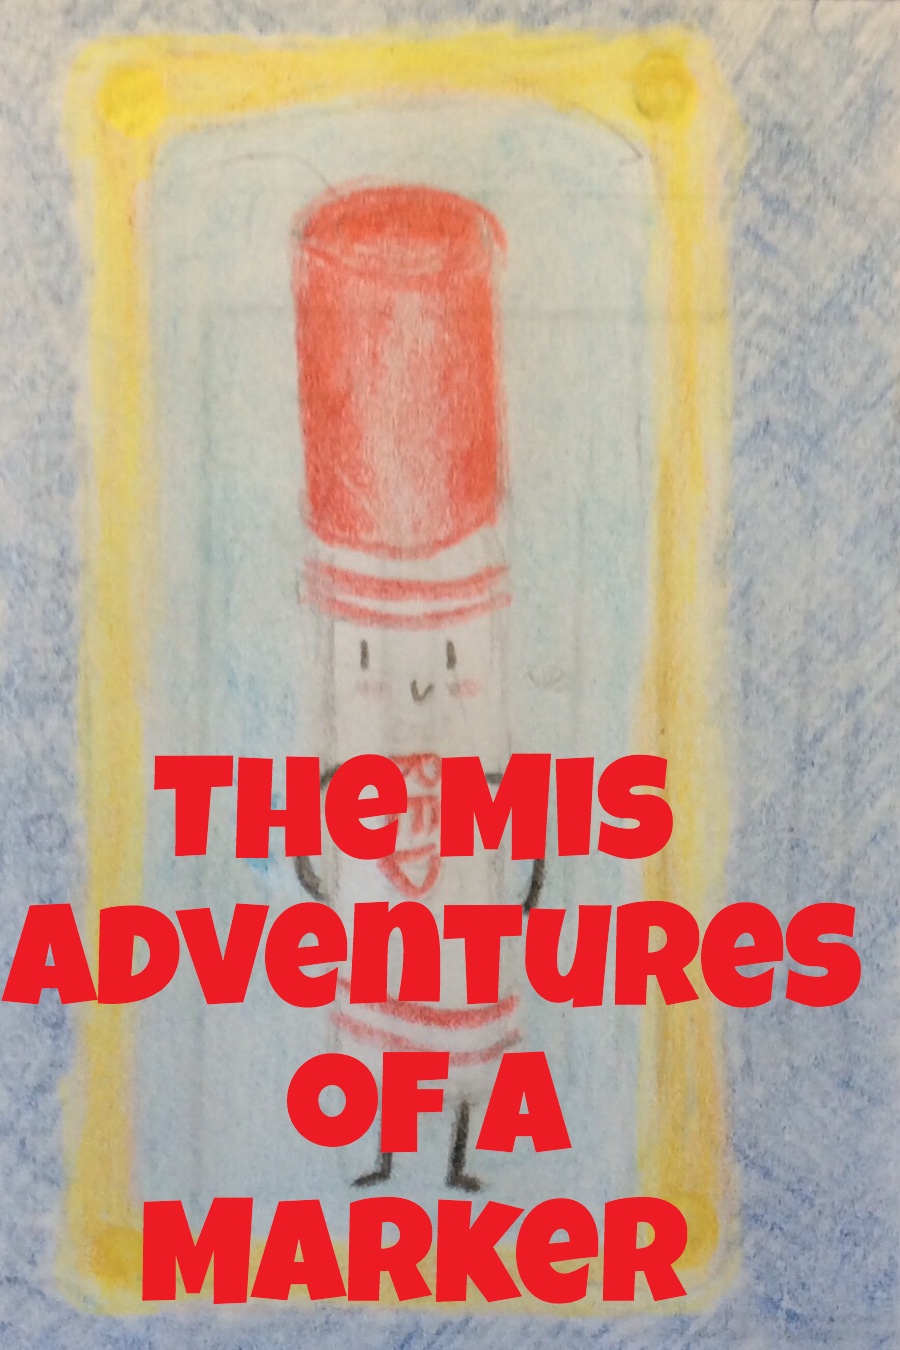 The Mis Adventures of Marker by Caroline B